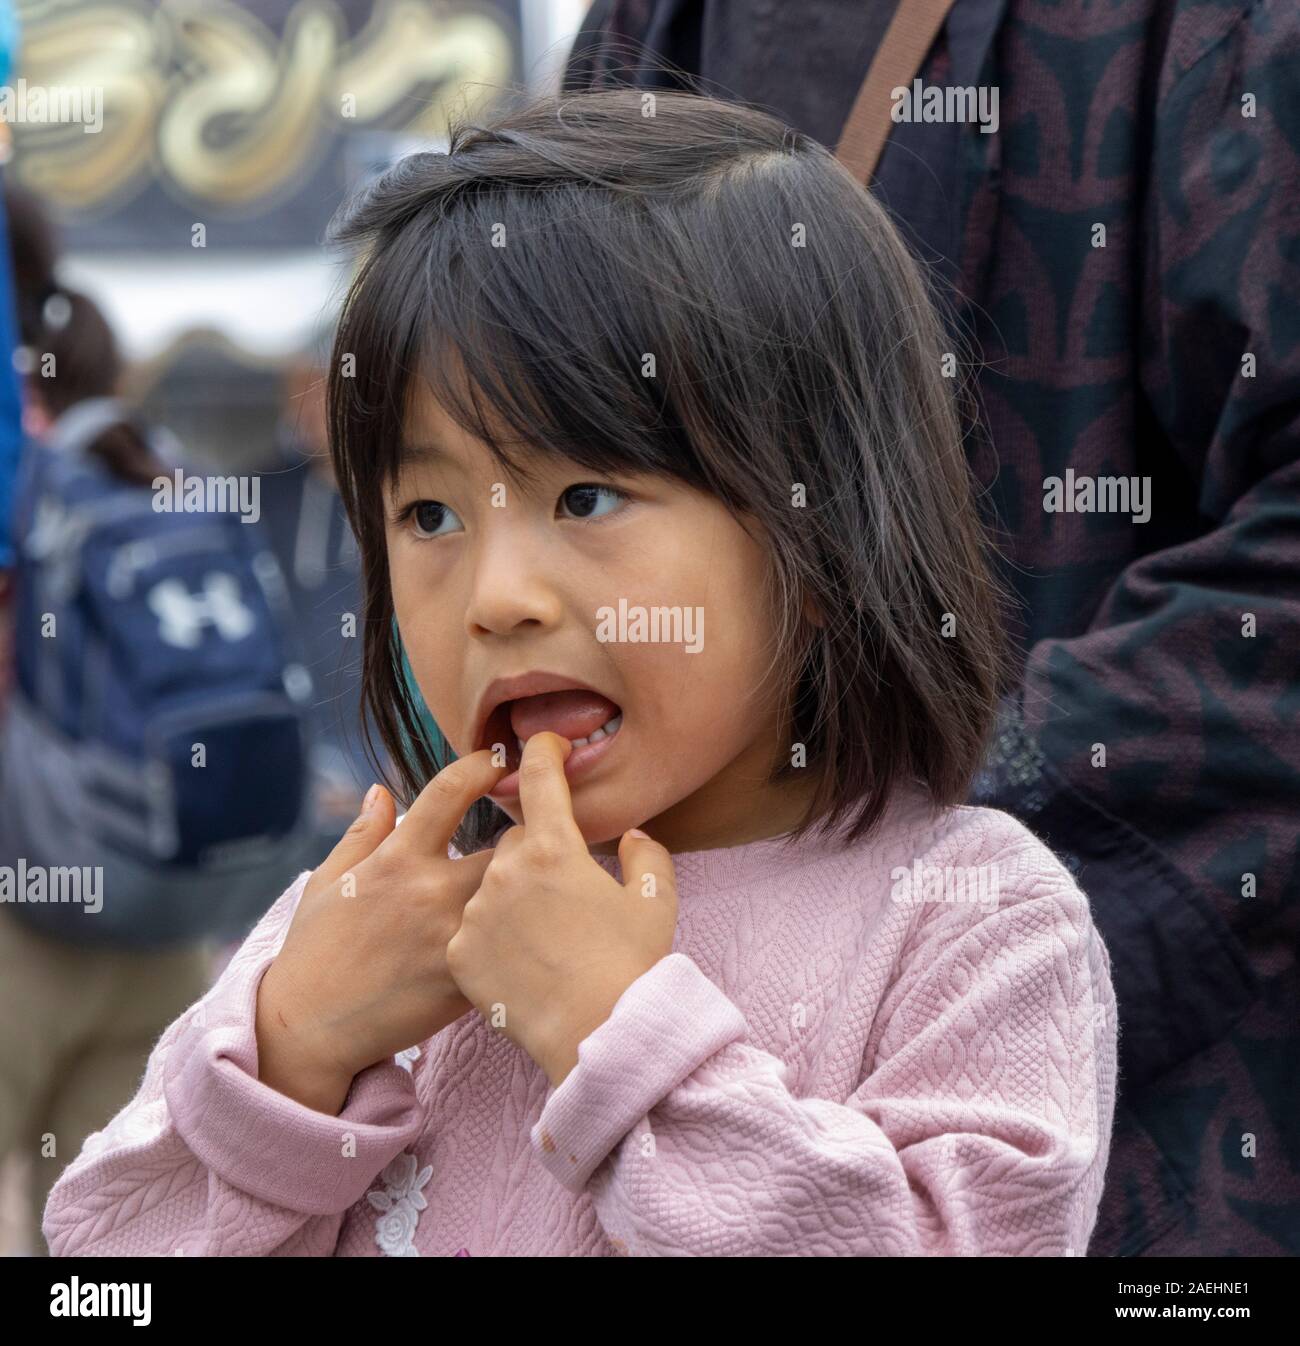 Japanese girl making a face by pulling her mouth, Tokyo, Japan Stock Photo